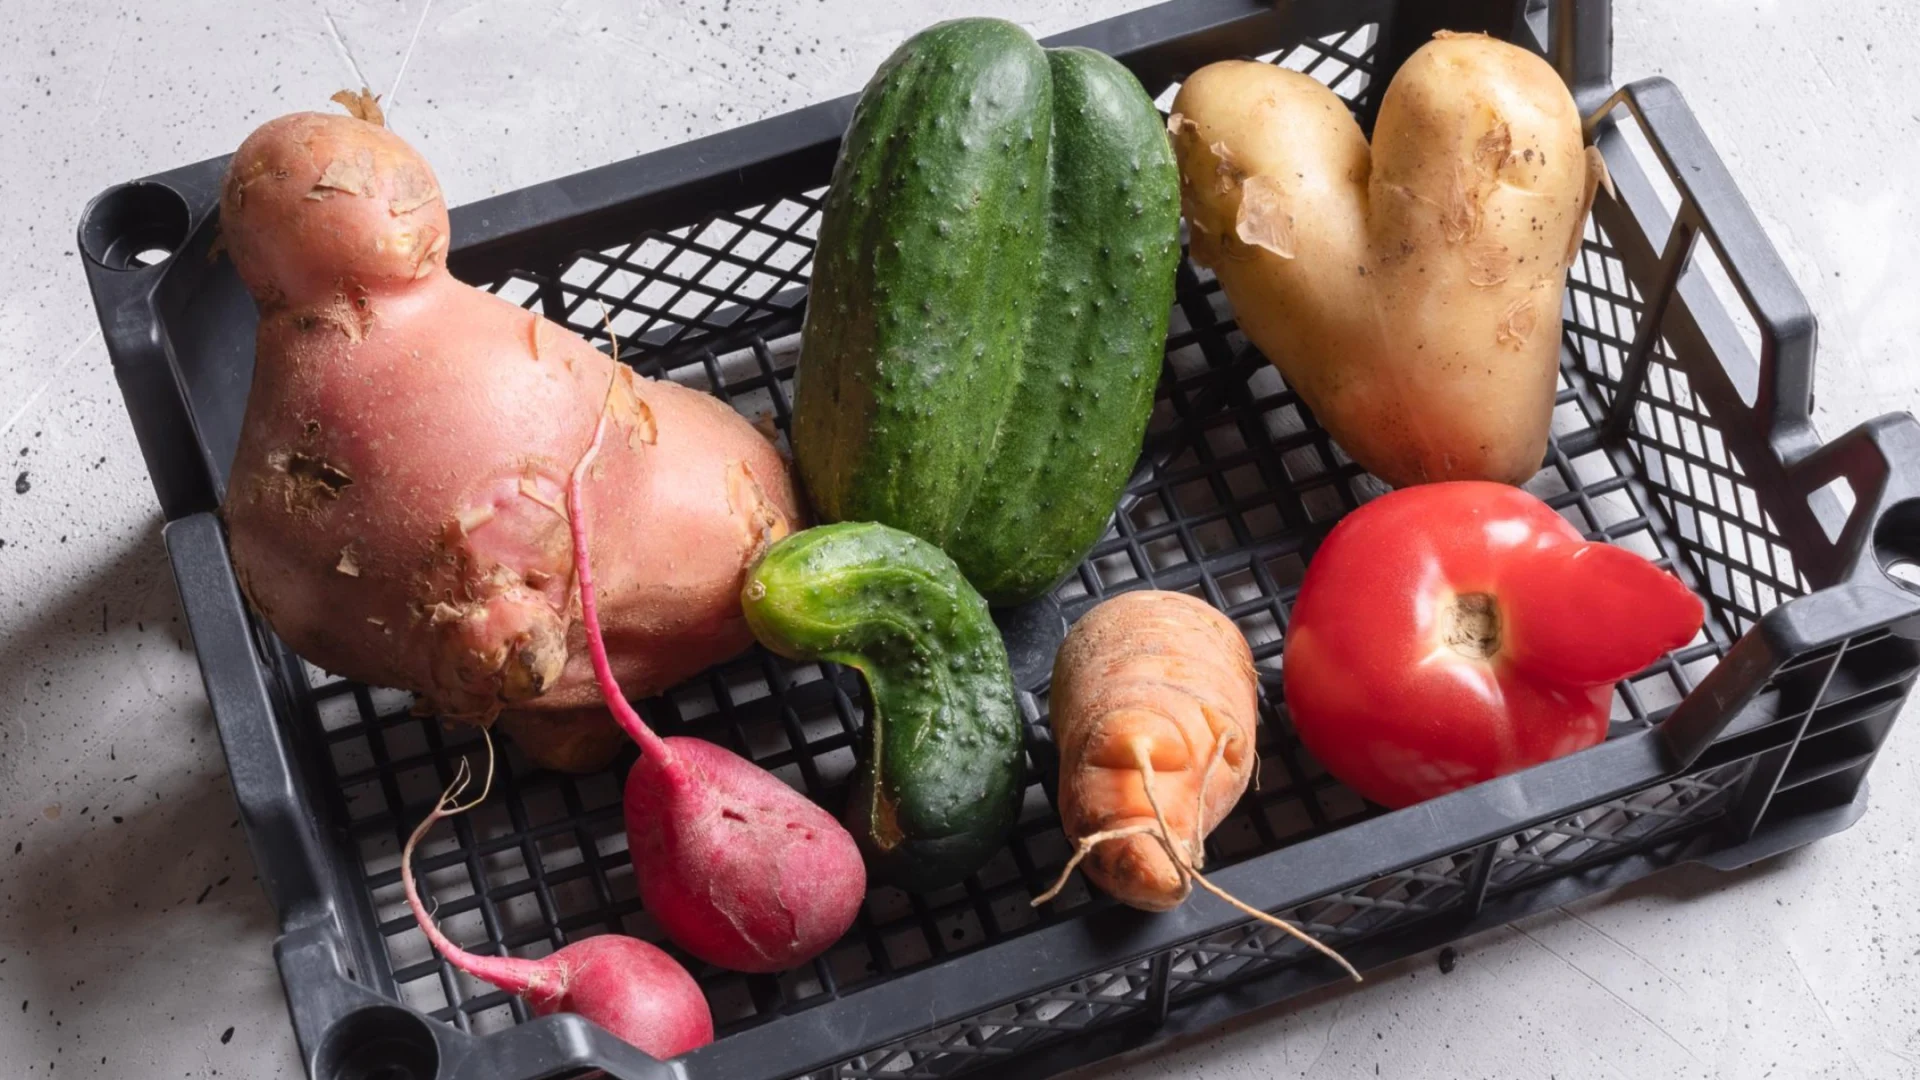 Crooked, thick and small vegetables in a box.